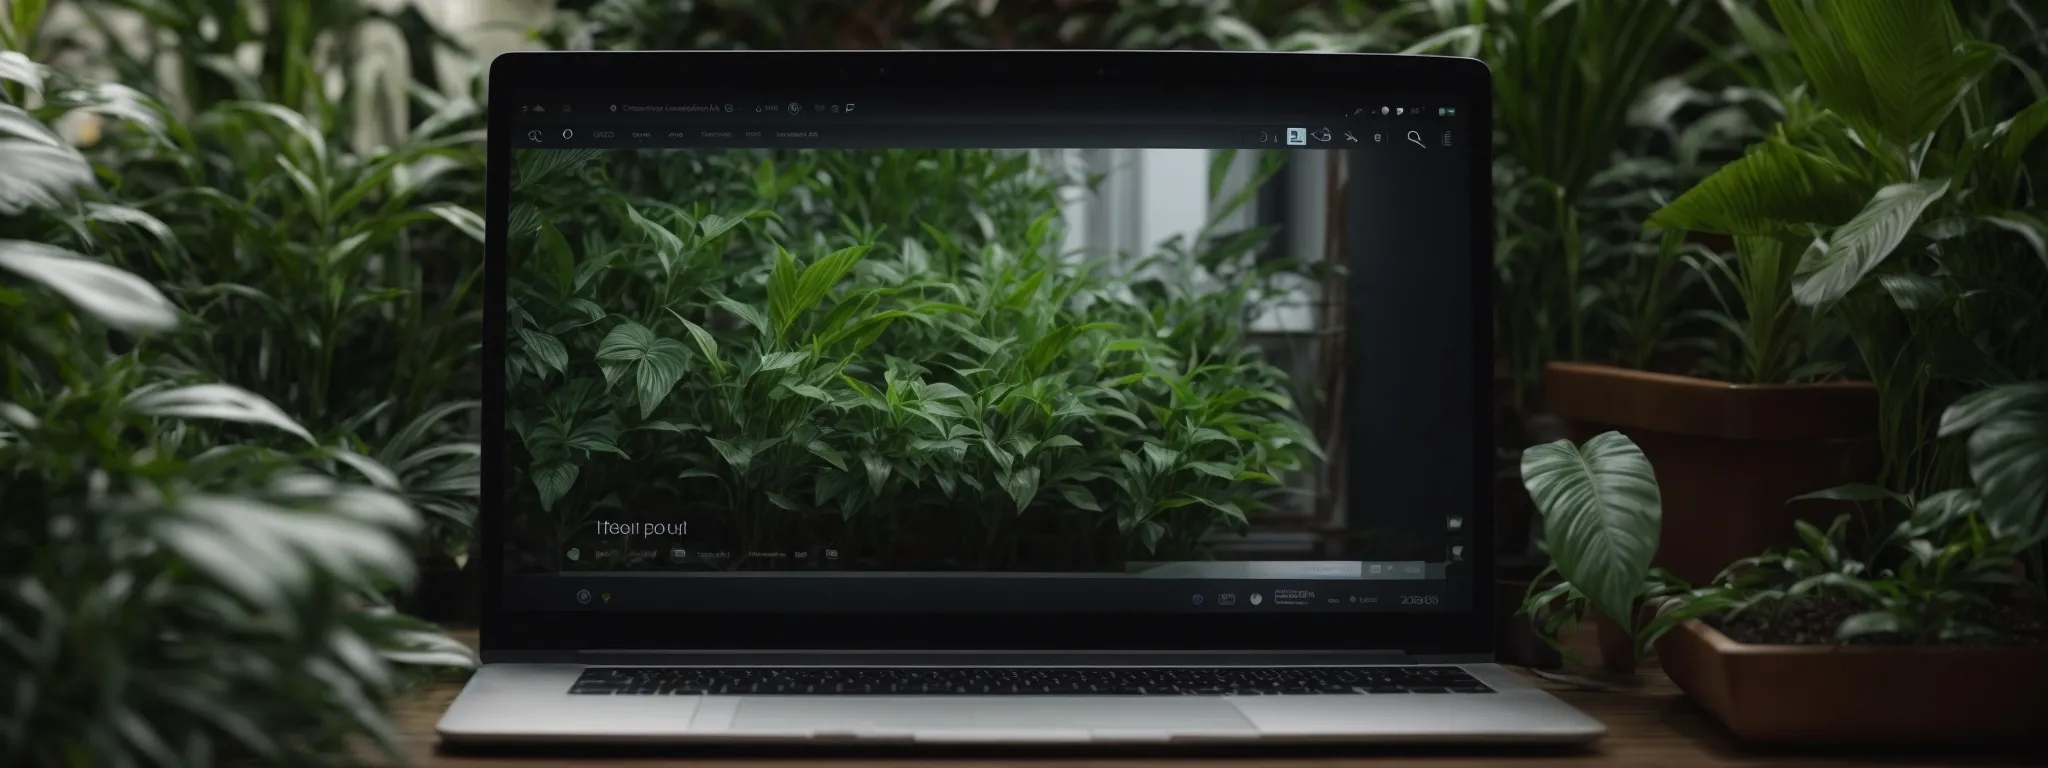 a laptop with a search engine open on the screen, surrounded by plants, indicating a focus on digital optimization.